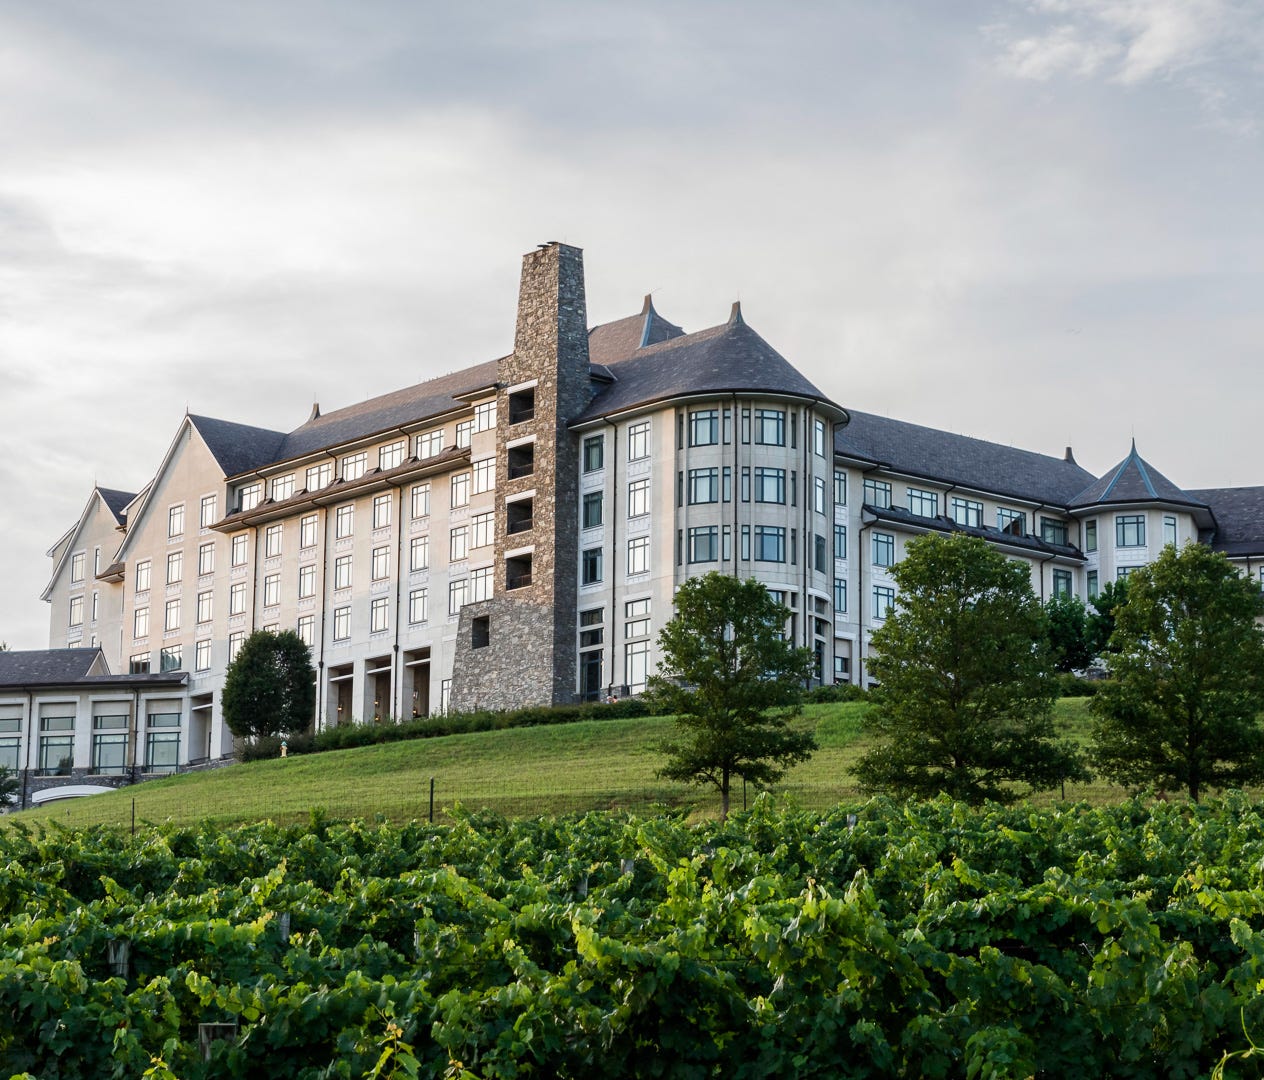 The Inn on Biltmore Estate — Asheville, N.C.: One of the country's most historic sites, Biltmore House was named a National Historic Landmark in 1963.    The Biltmore Estate is billed as the largest home in America and is one of Asheville's most popula